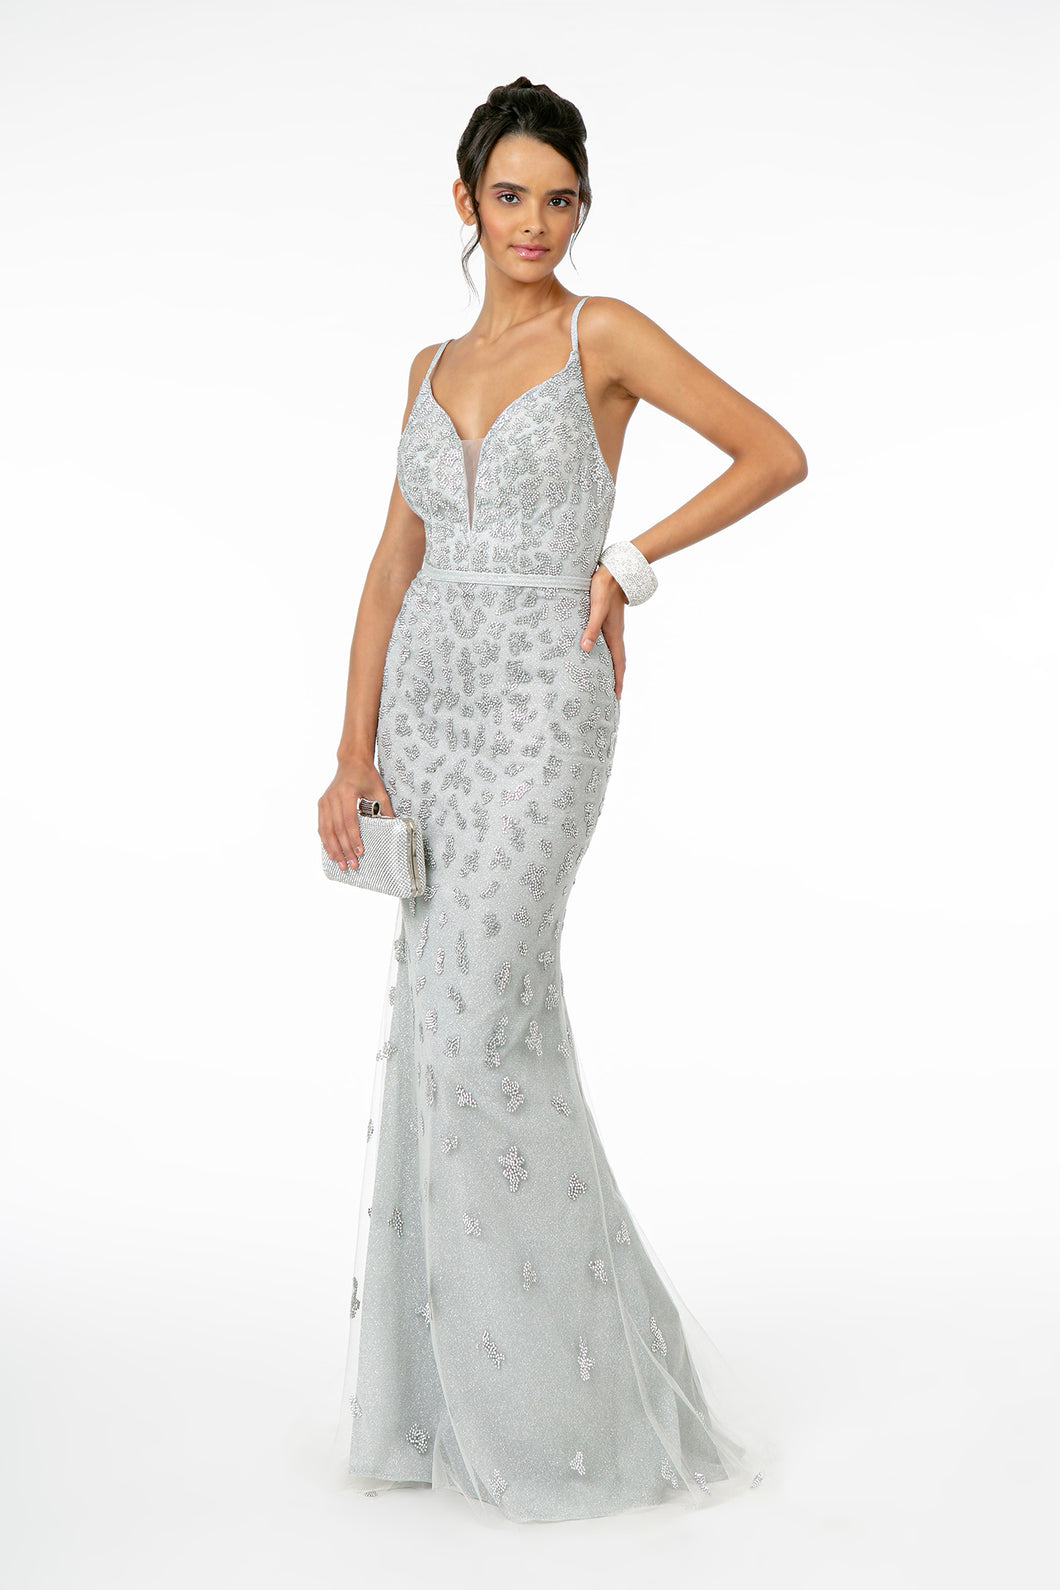 GL 2917 - Glittery Fit & Flare Prom Gown with Spaghetti Straps V-Neck & Open Back Dresses GLS XS Silver 